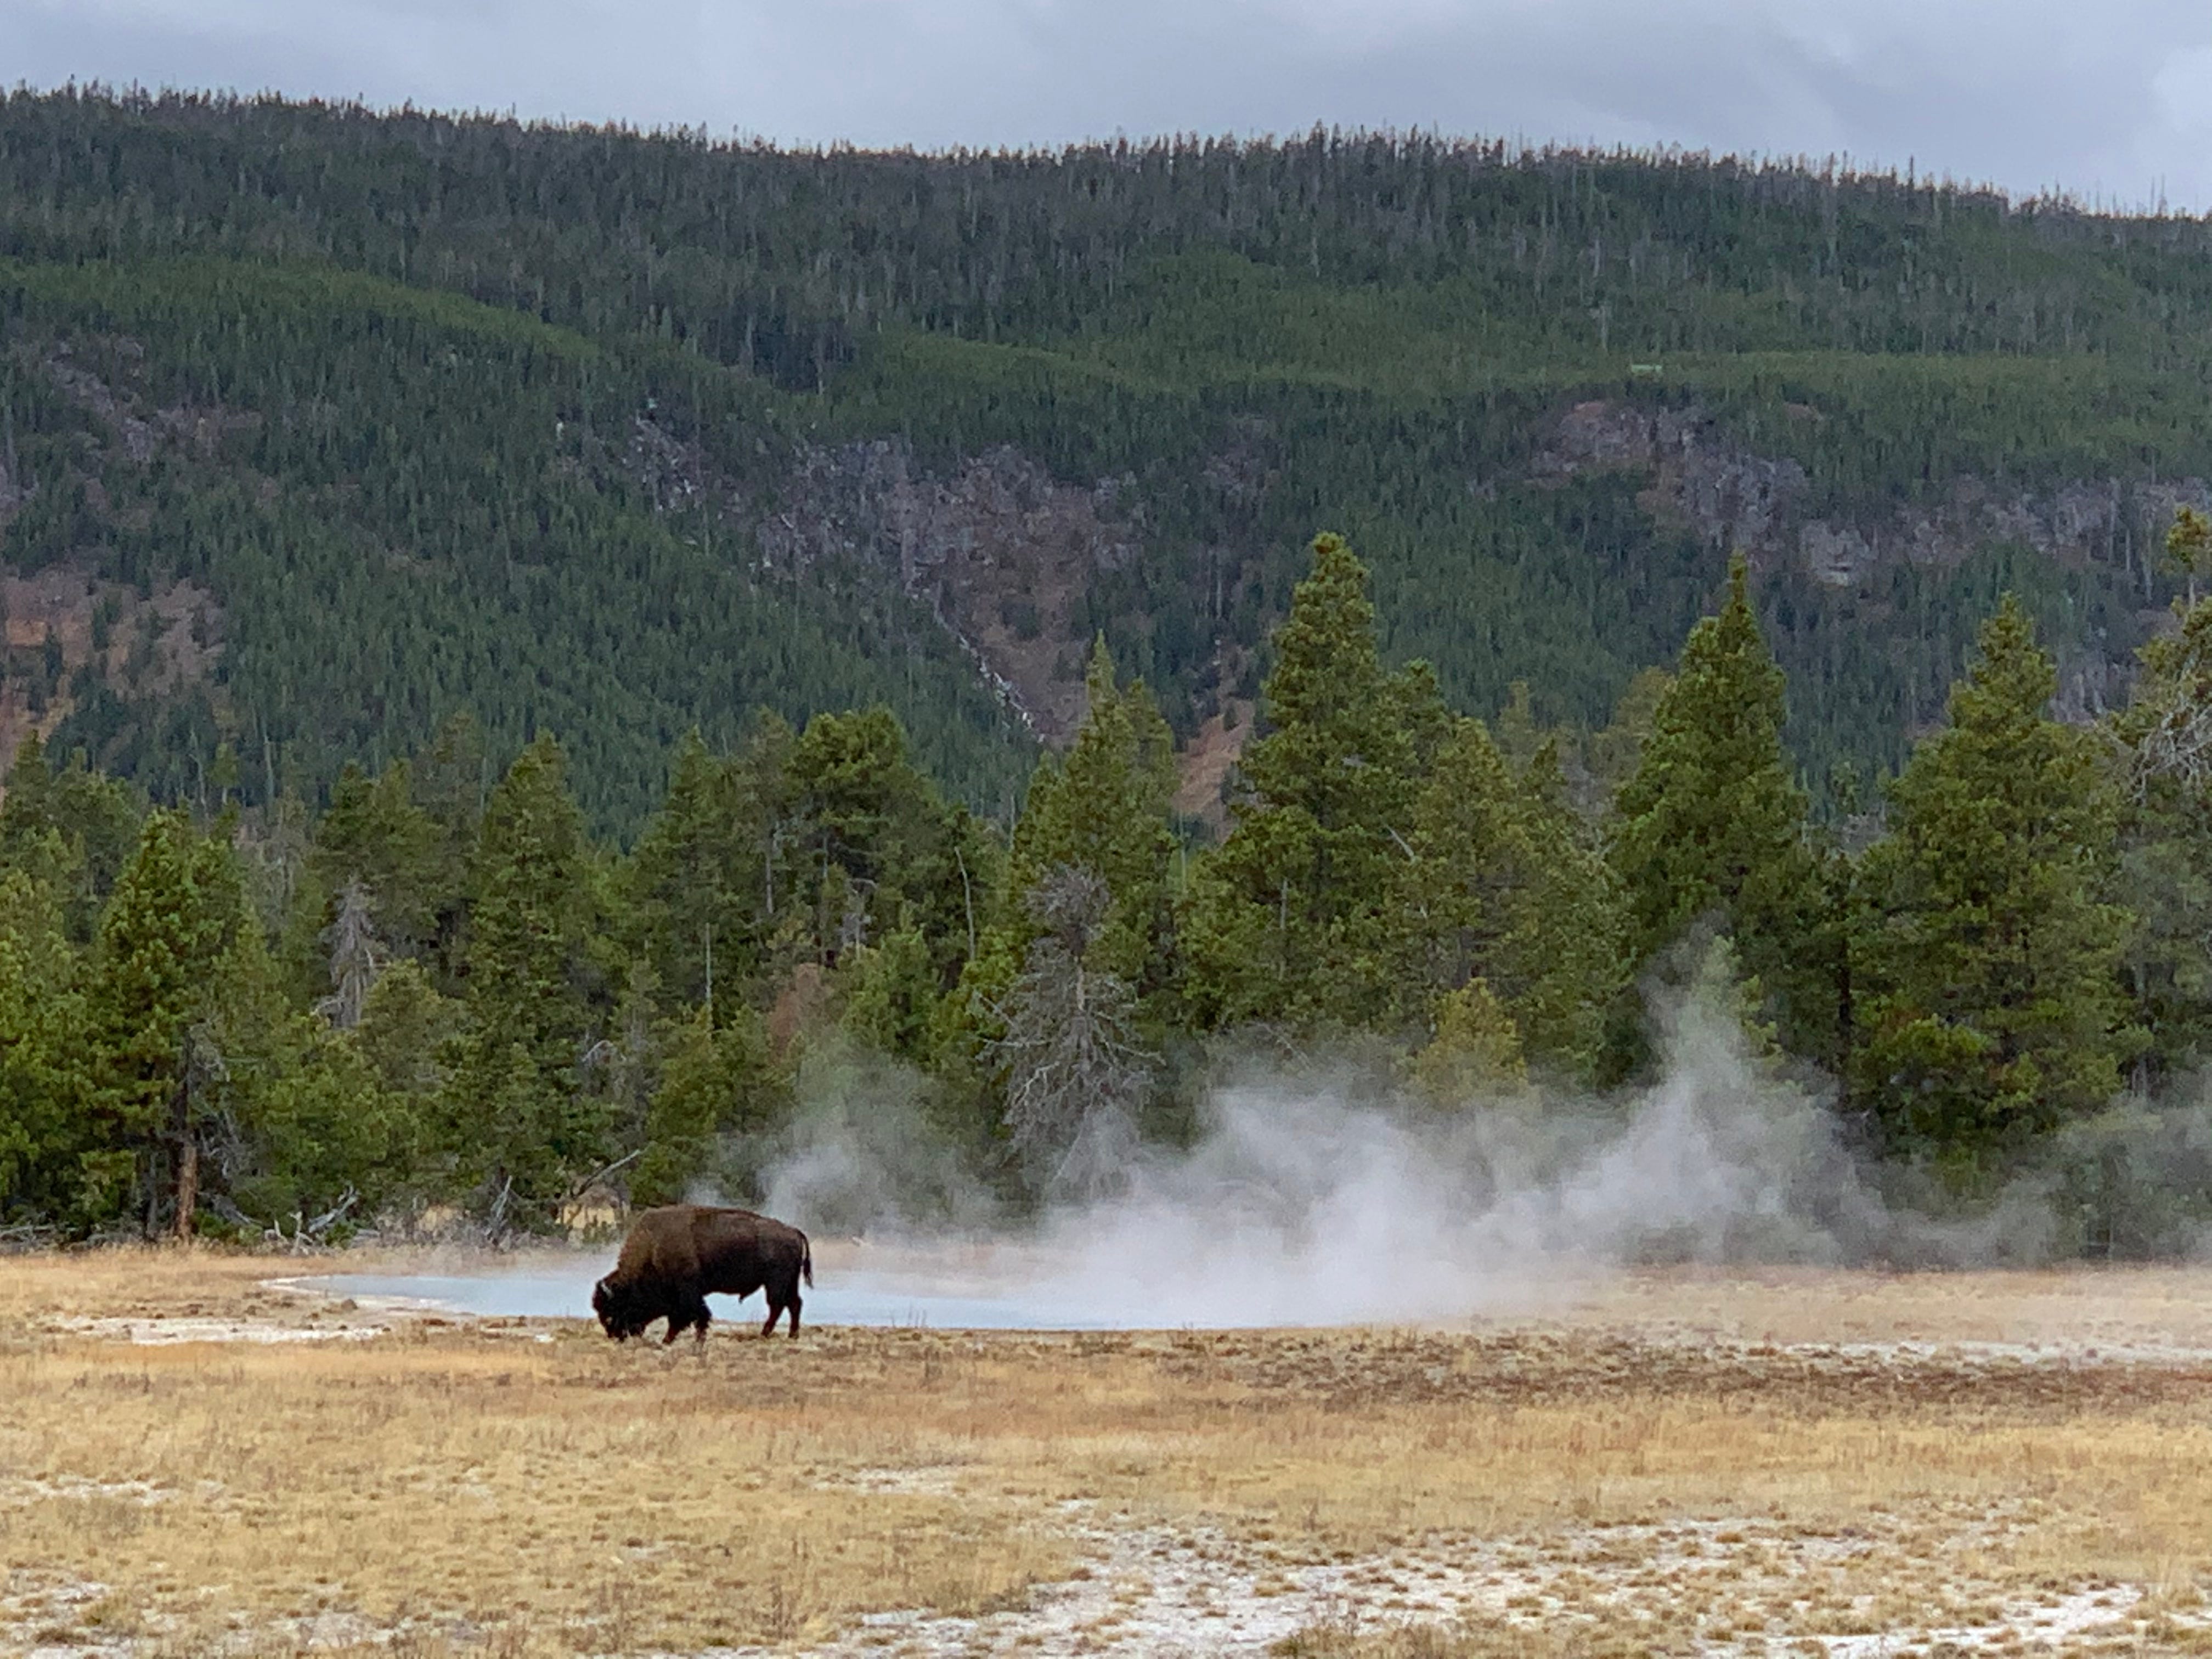 A bison wanders next to a steaming hot spring in Yellowstone National Park, Wyoming.